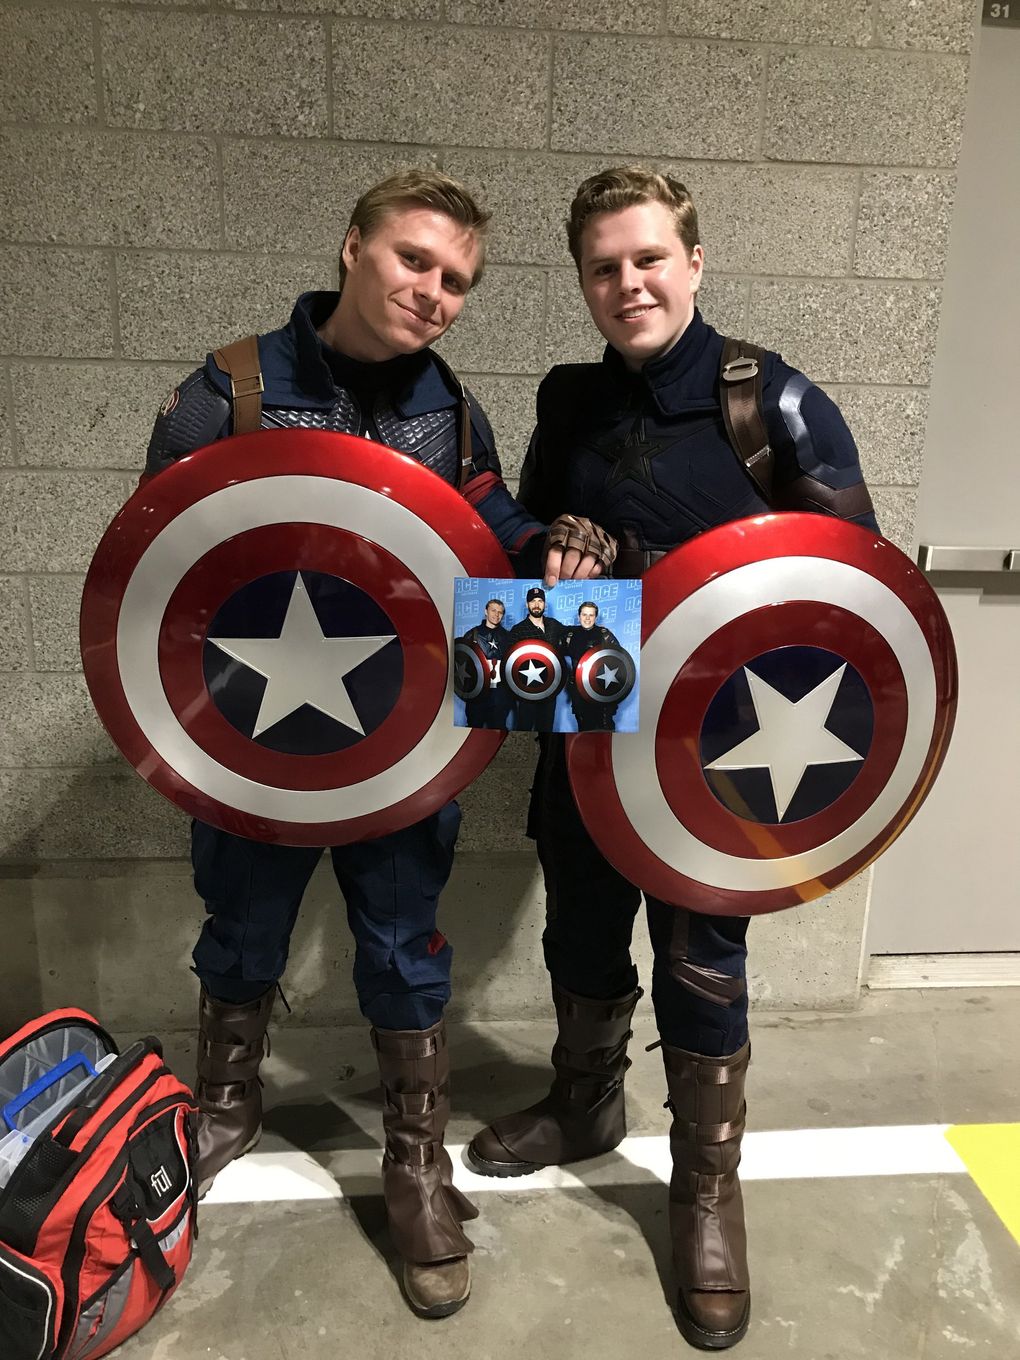 Avengers fans had a super weekend at Seattle’s ACE Comic Con The